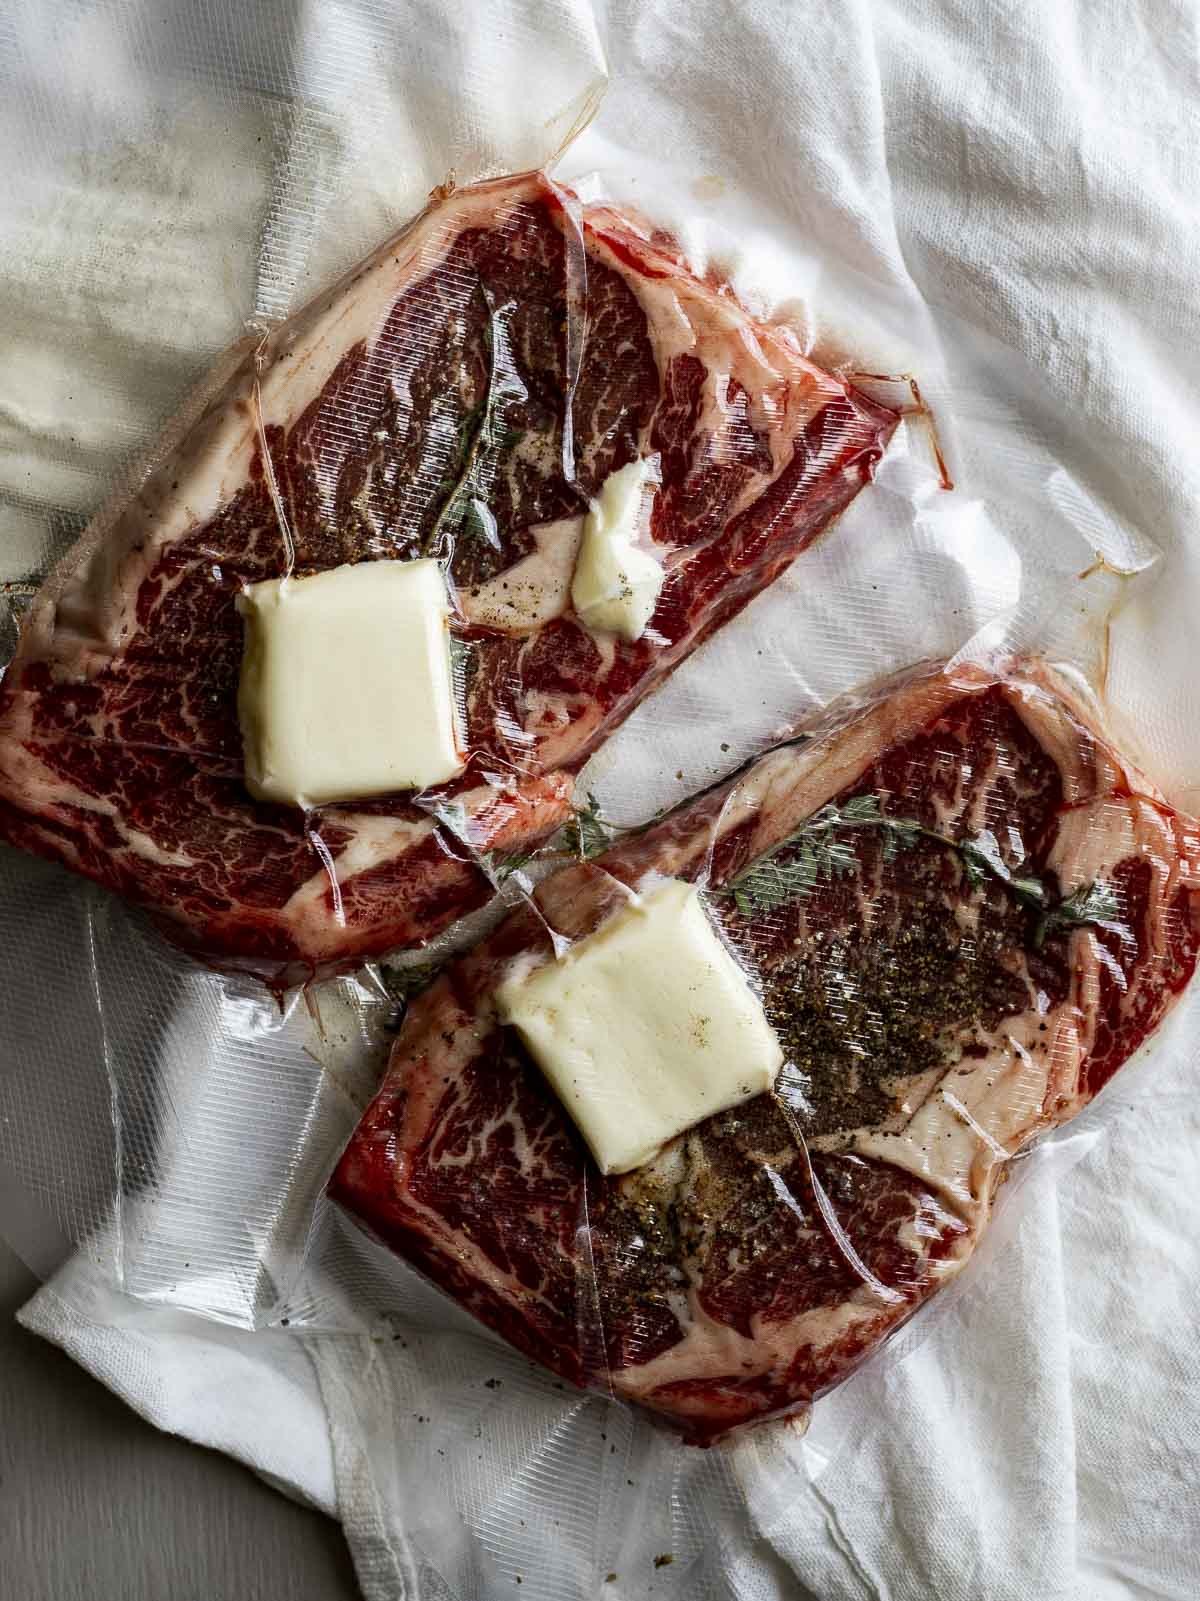 Two ribeye steaks vacuum sealed in a bag with butter, garlic and herbs.